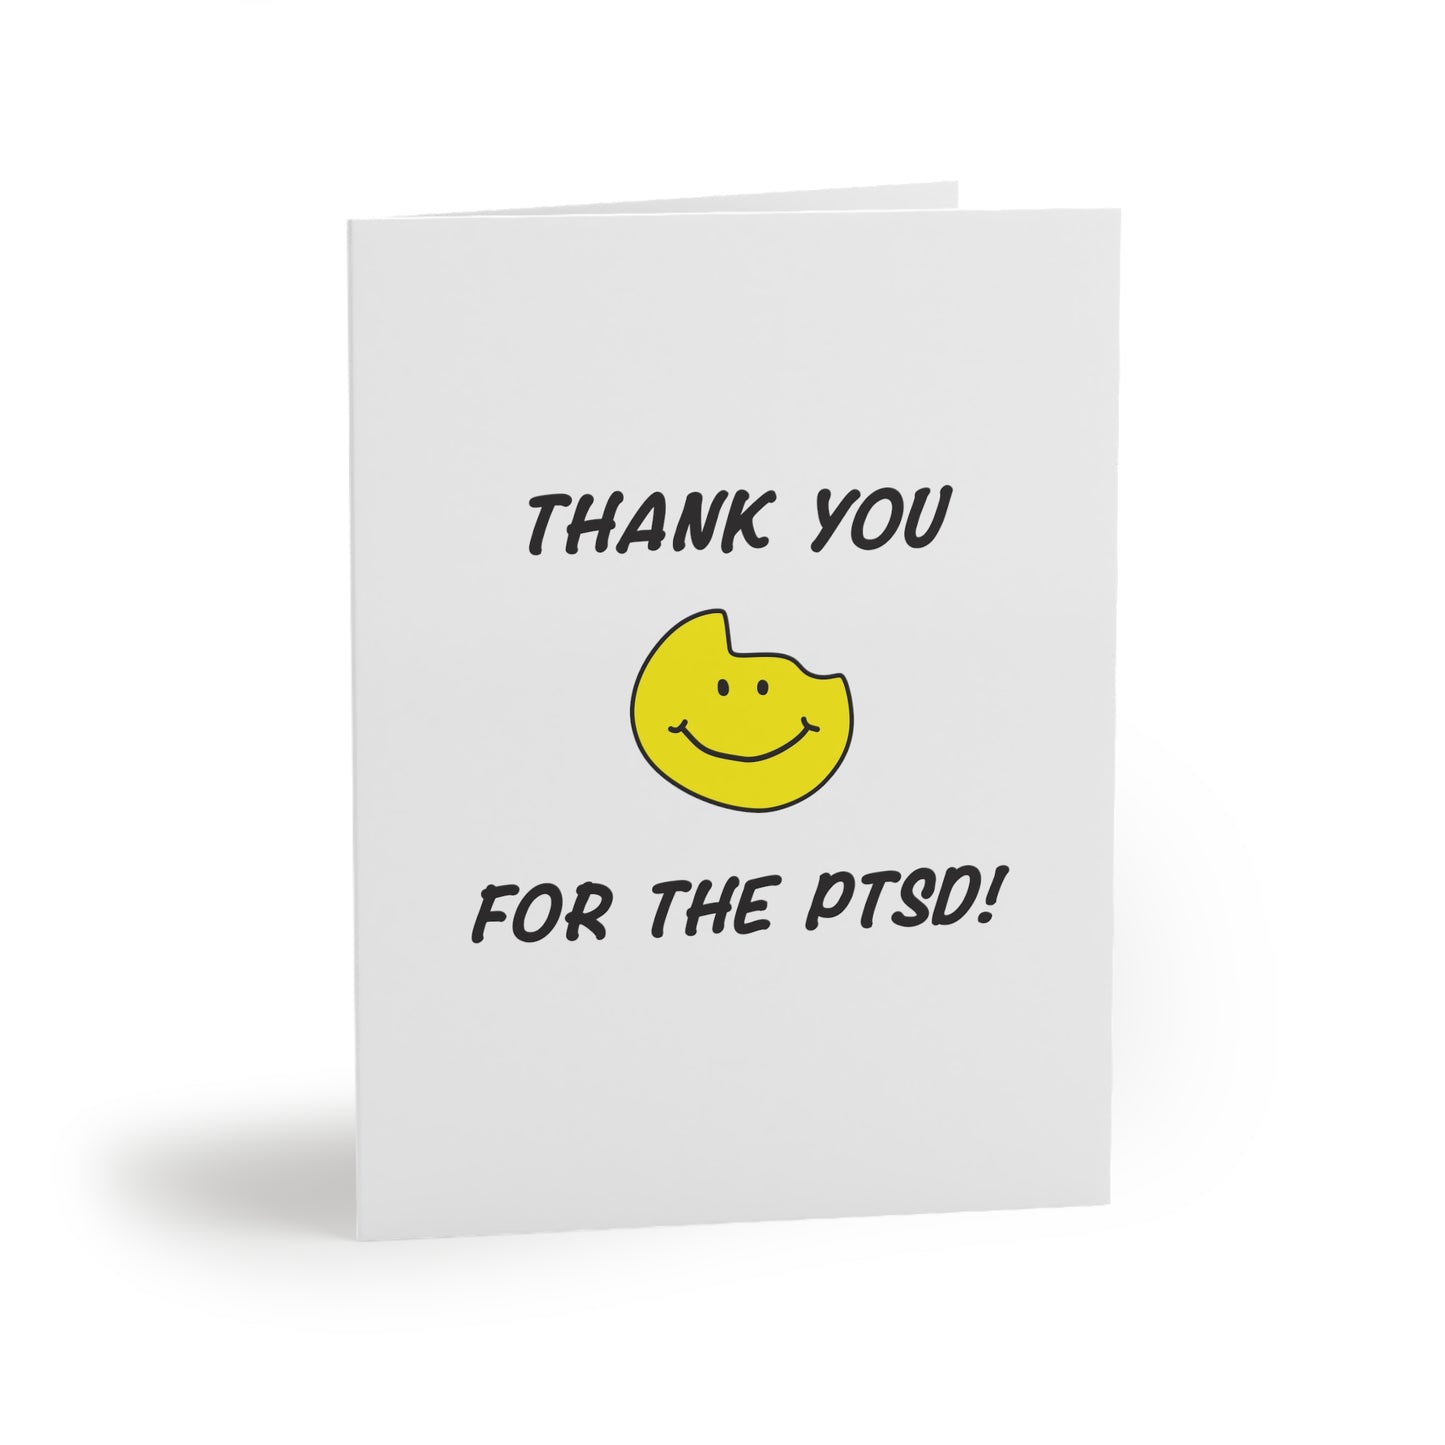 Thank You! Greeting Cards (8 or16 pcs)